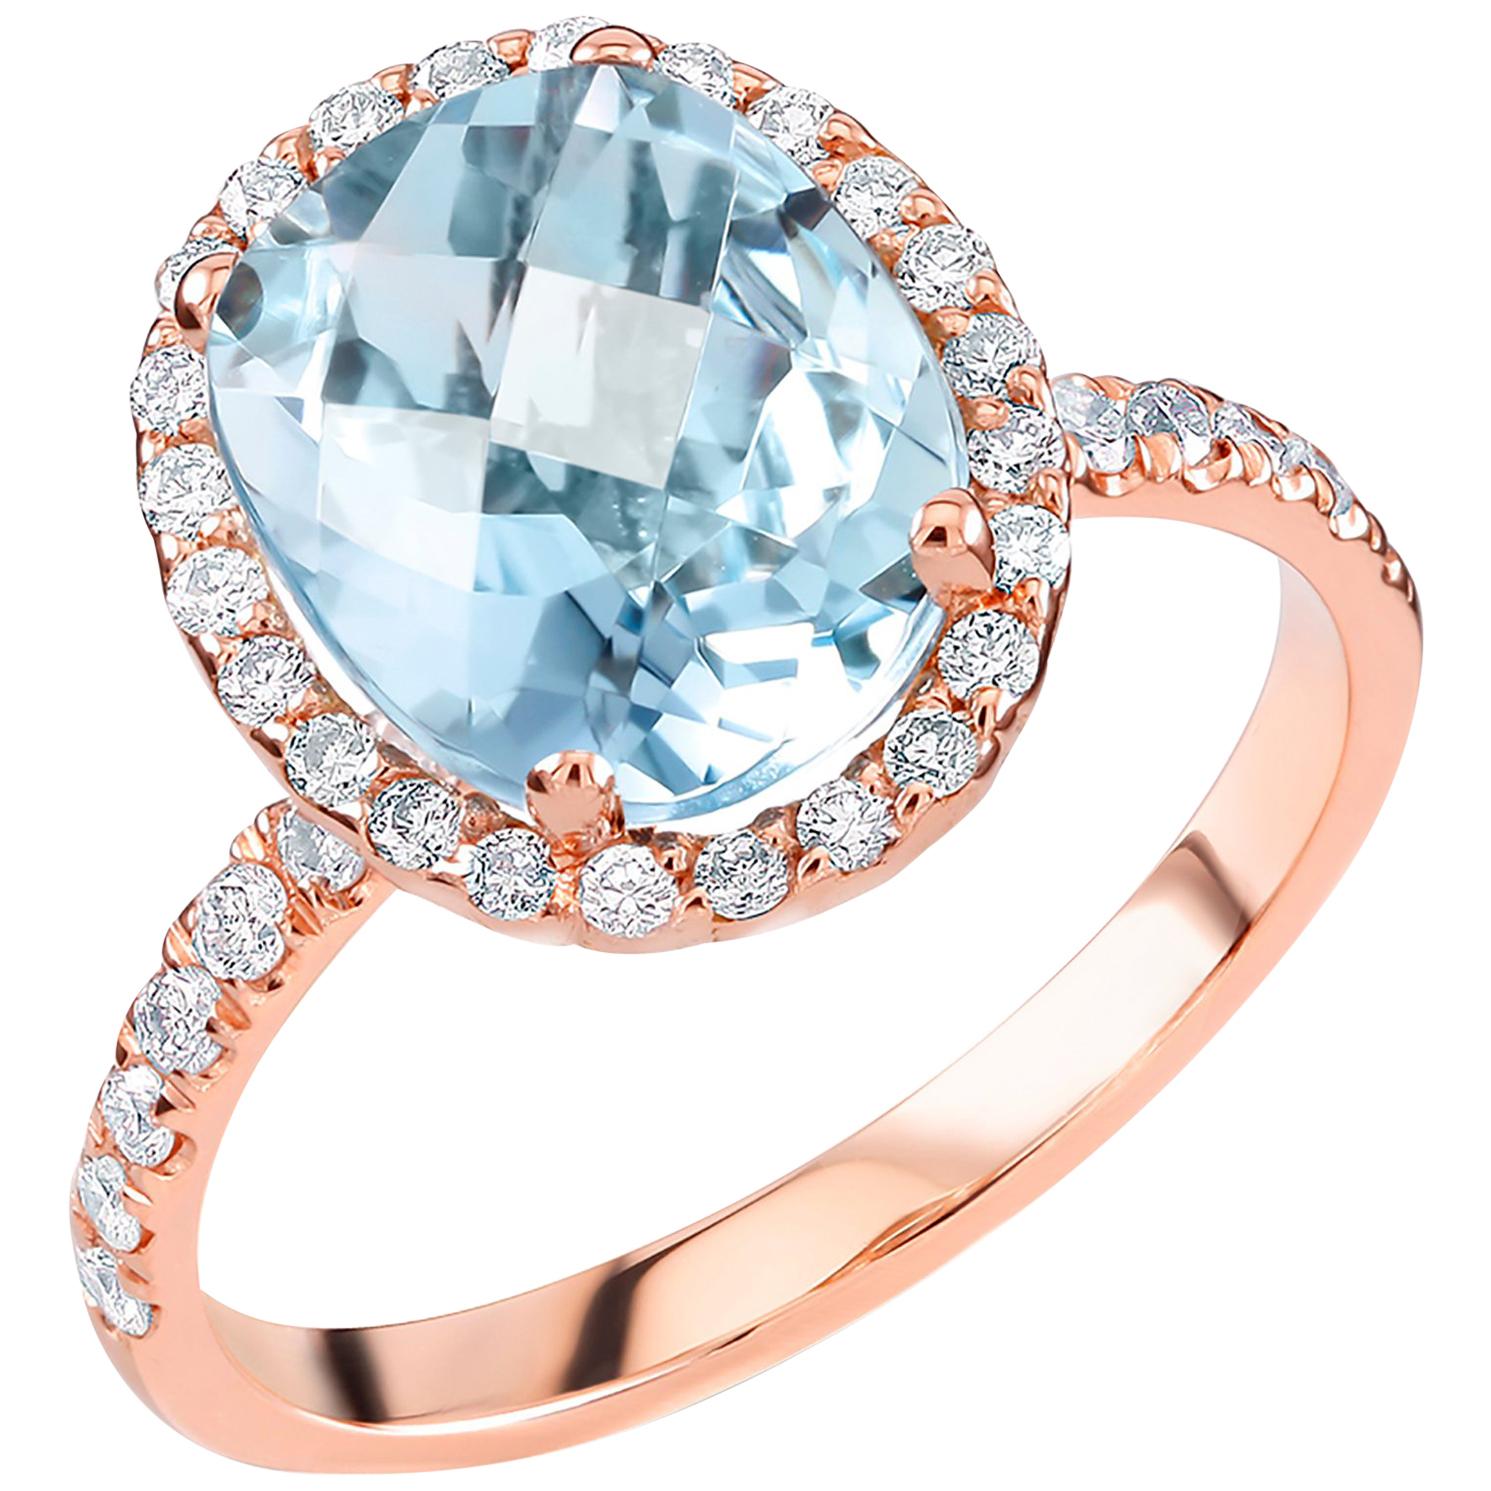 Eighteen karat rose gold cocktail cluster ring 
Oval shape aquamarine weighing 2.10 carat
Surrounded by  pave set diamonds weighing 0.65
Ring finger size 6 In Stock
New Ring
Ring can be resized 
Handmade in the USA
Our team of graduate gemologists